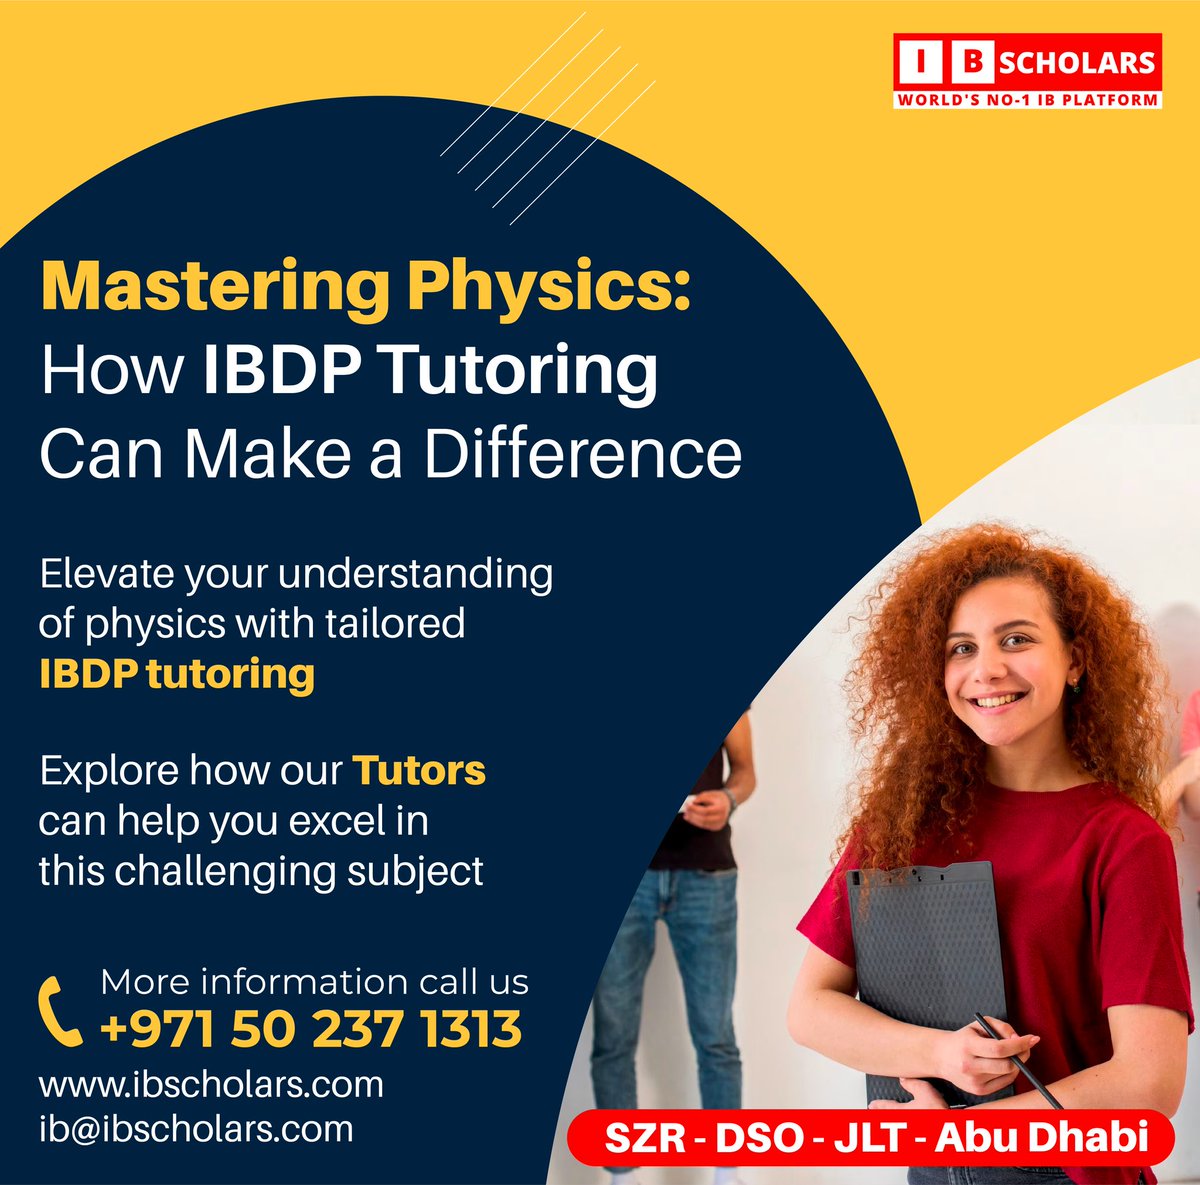 IB Scholars, your trusted source for premier IBDP Physics tutoring in Dubai and Abu Dhabi! 📷📷 Connect with us at 055 956 4344 or visit ibscholars.com 
#IBScholars #PhysicsExcellence #IBDP #DubaiTutoring #AbuDhabiEducation